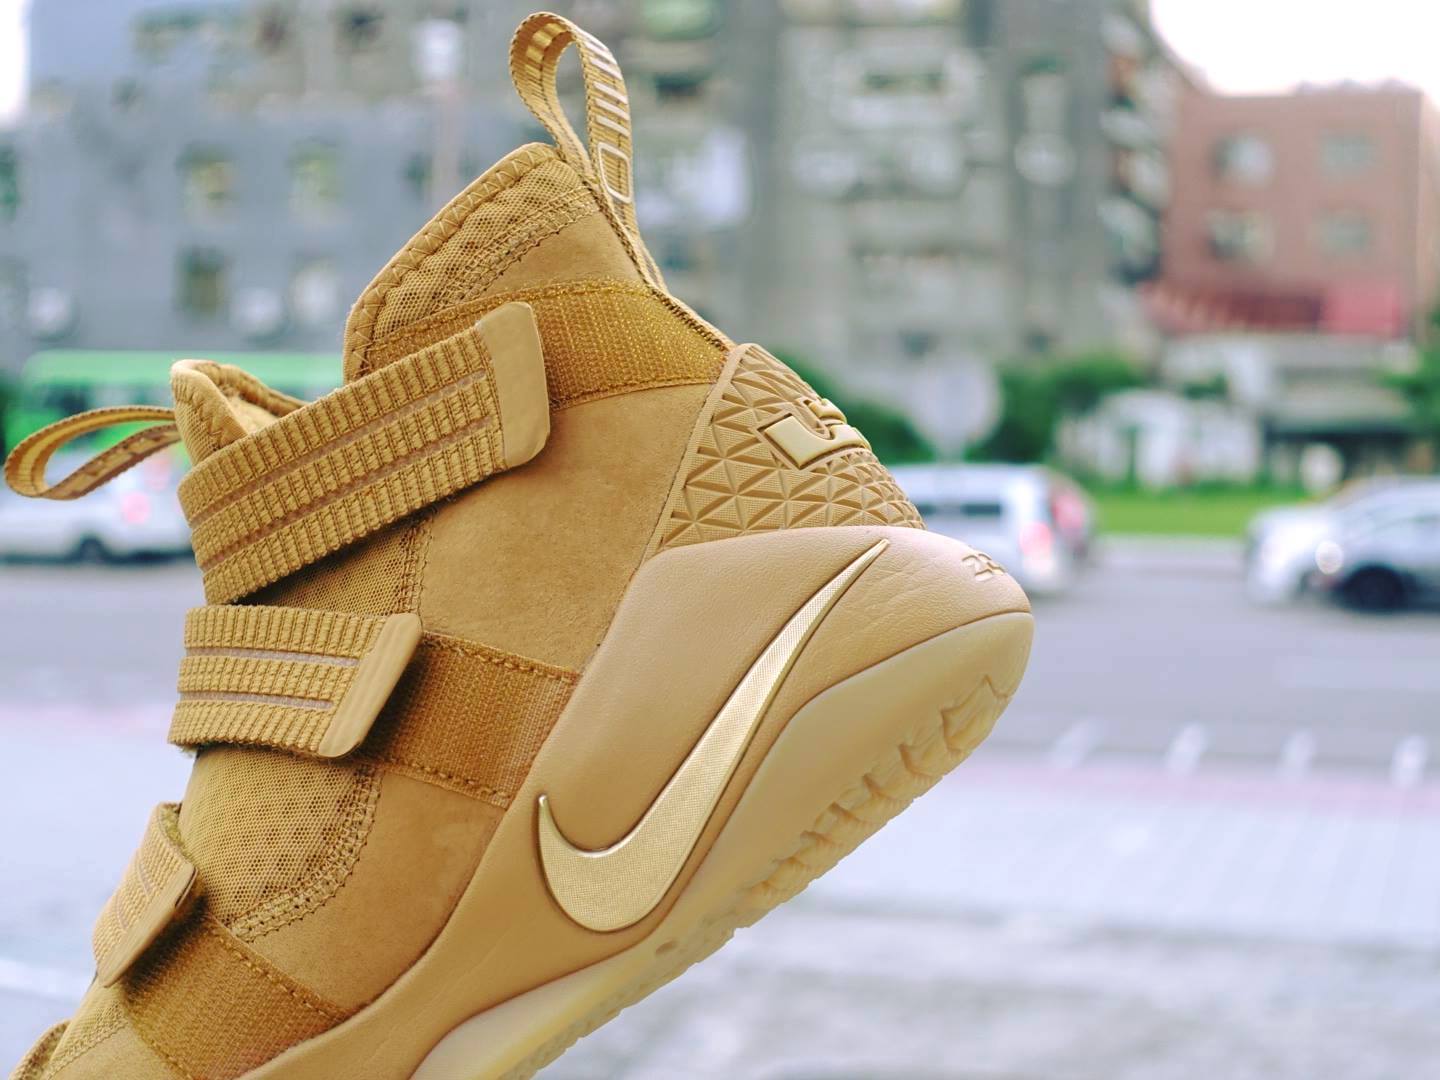 Nike LeBron Soldier 11 SFG Wheat Release Date 897647-700 (4)